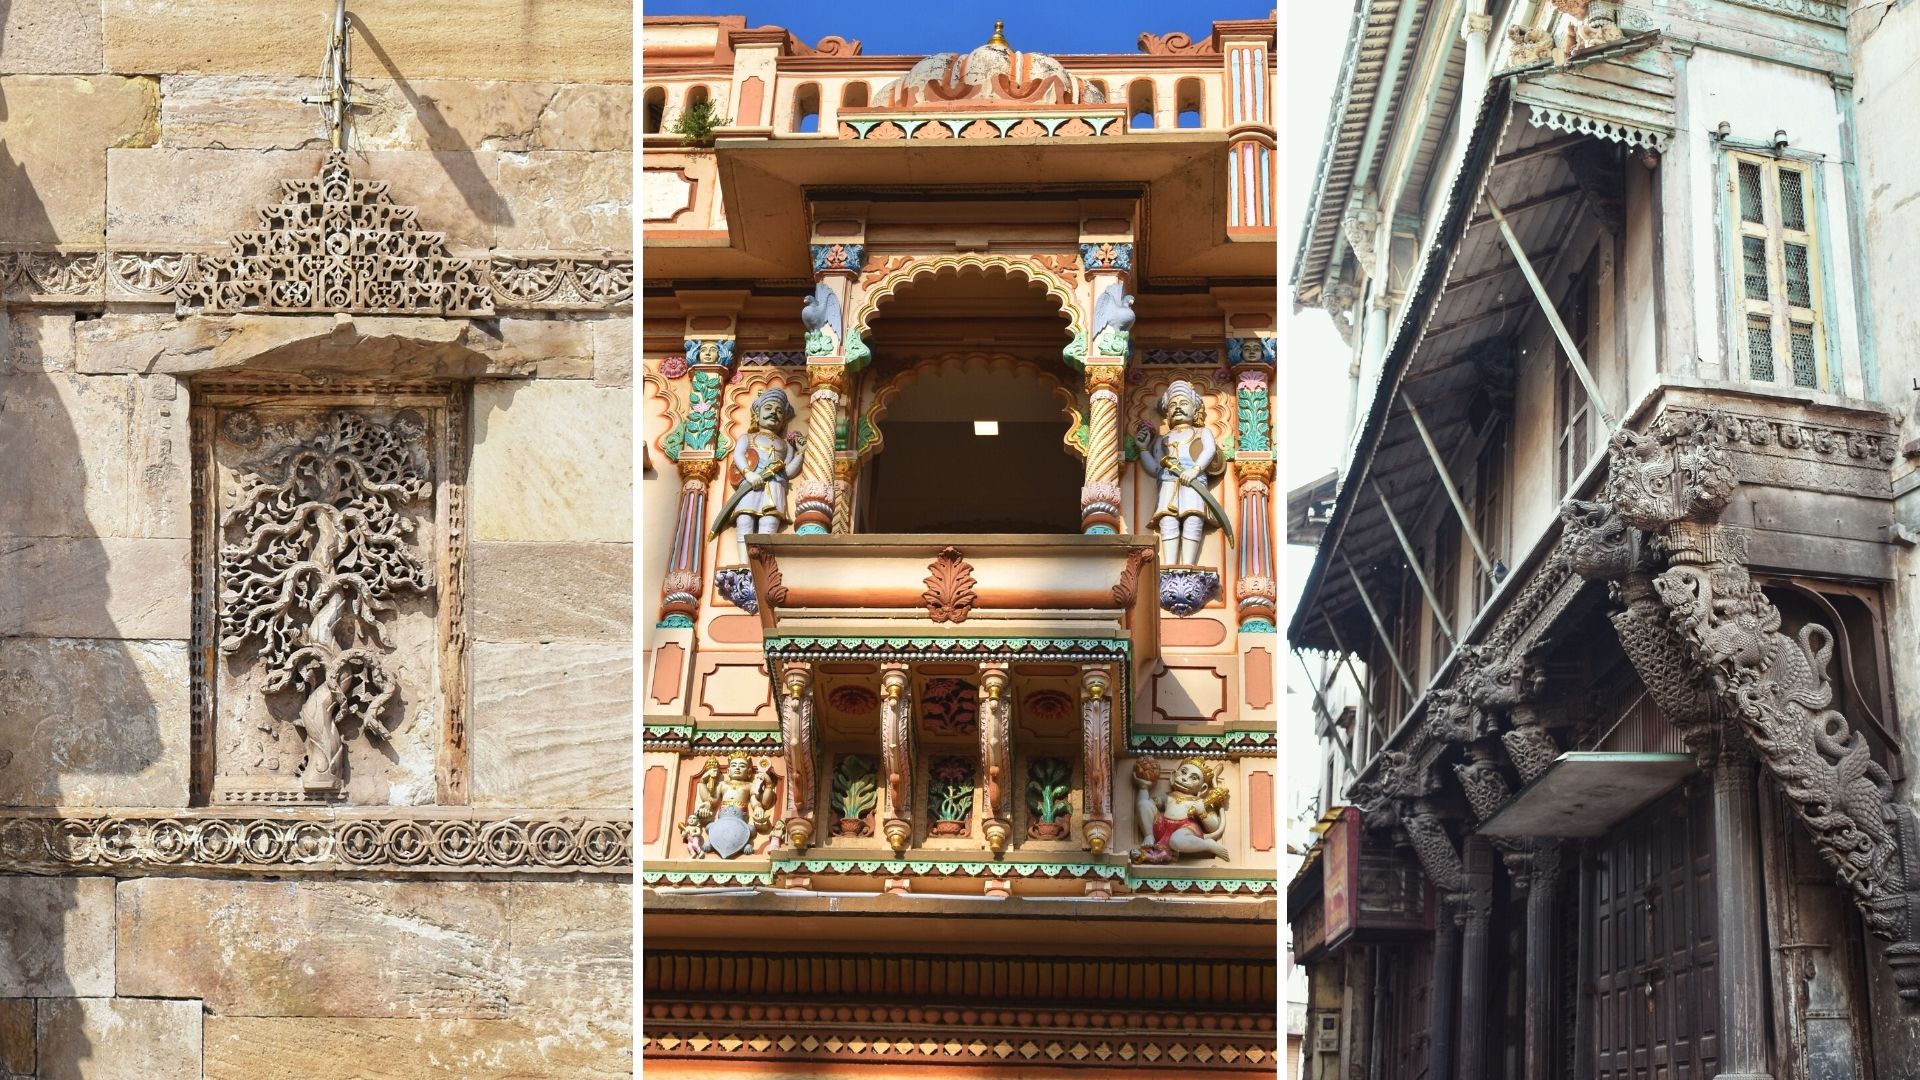 Centuries-old architecture within Ahmedabad's walled city